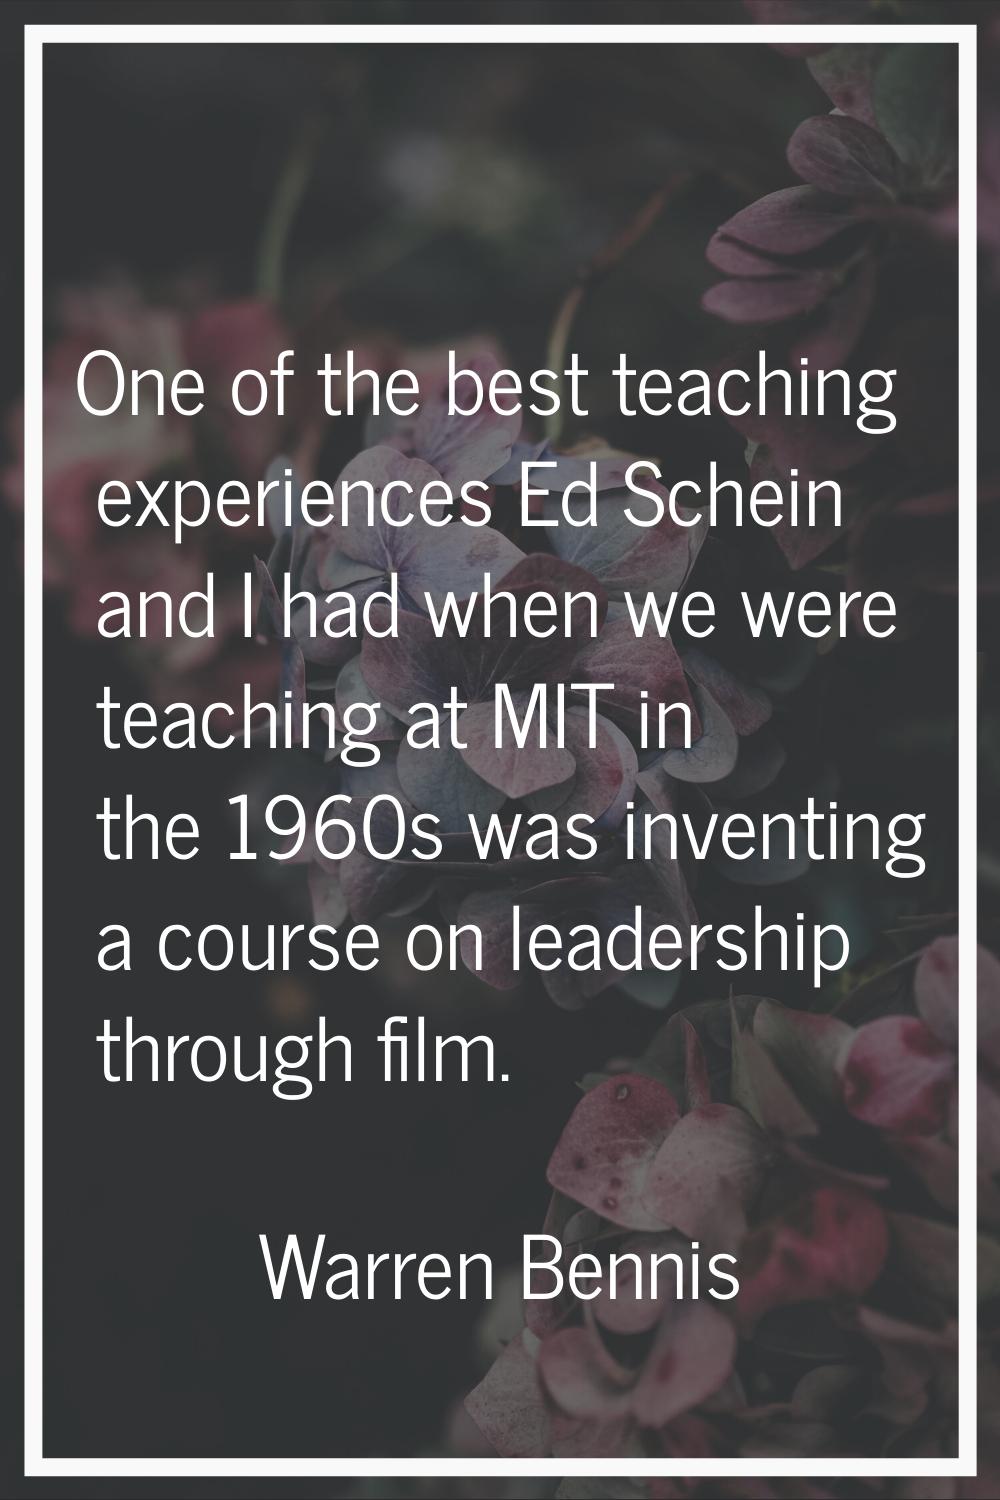 One of the best teaching experiences Ed Schein and I had when we were teaching at MIT in the 1960s 